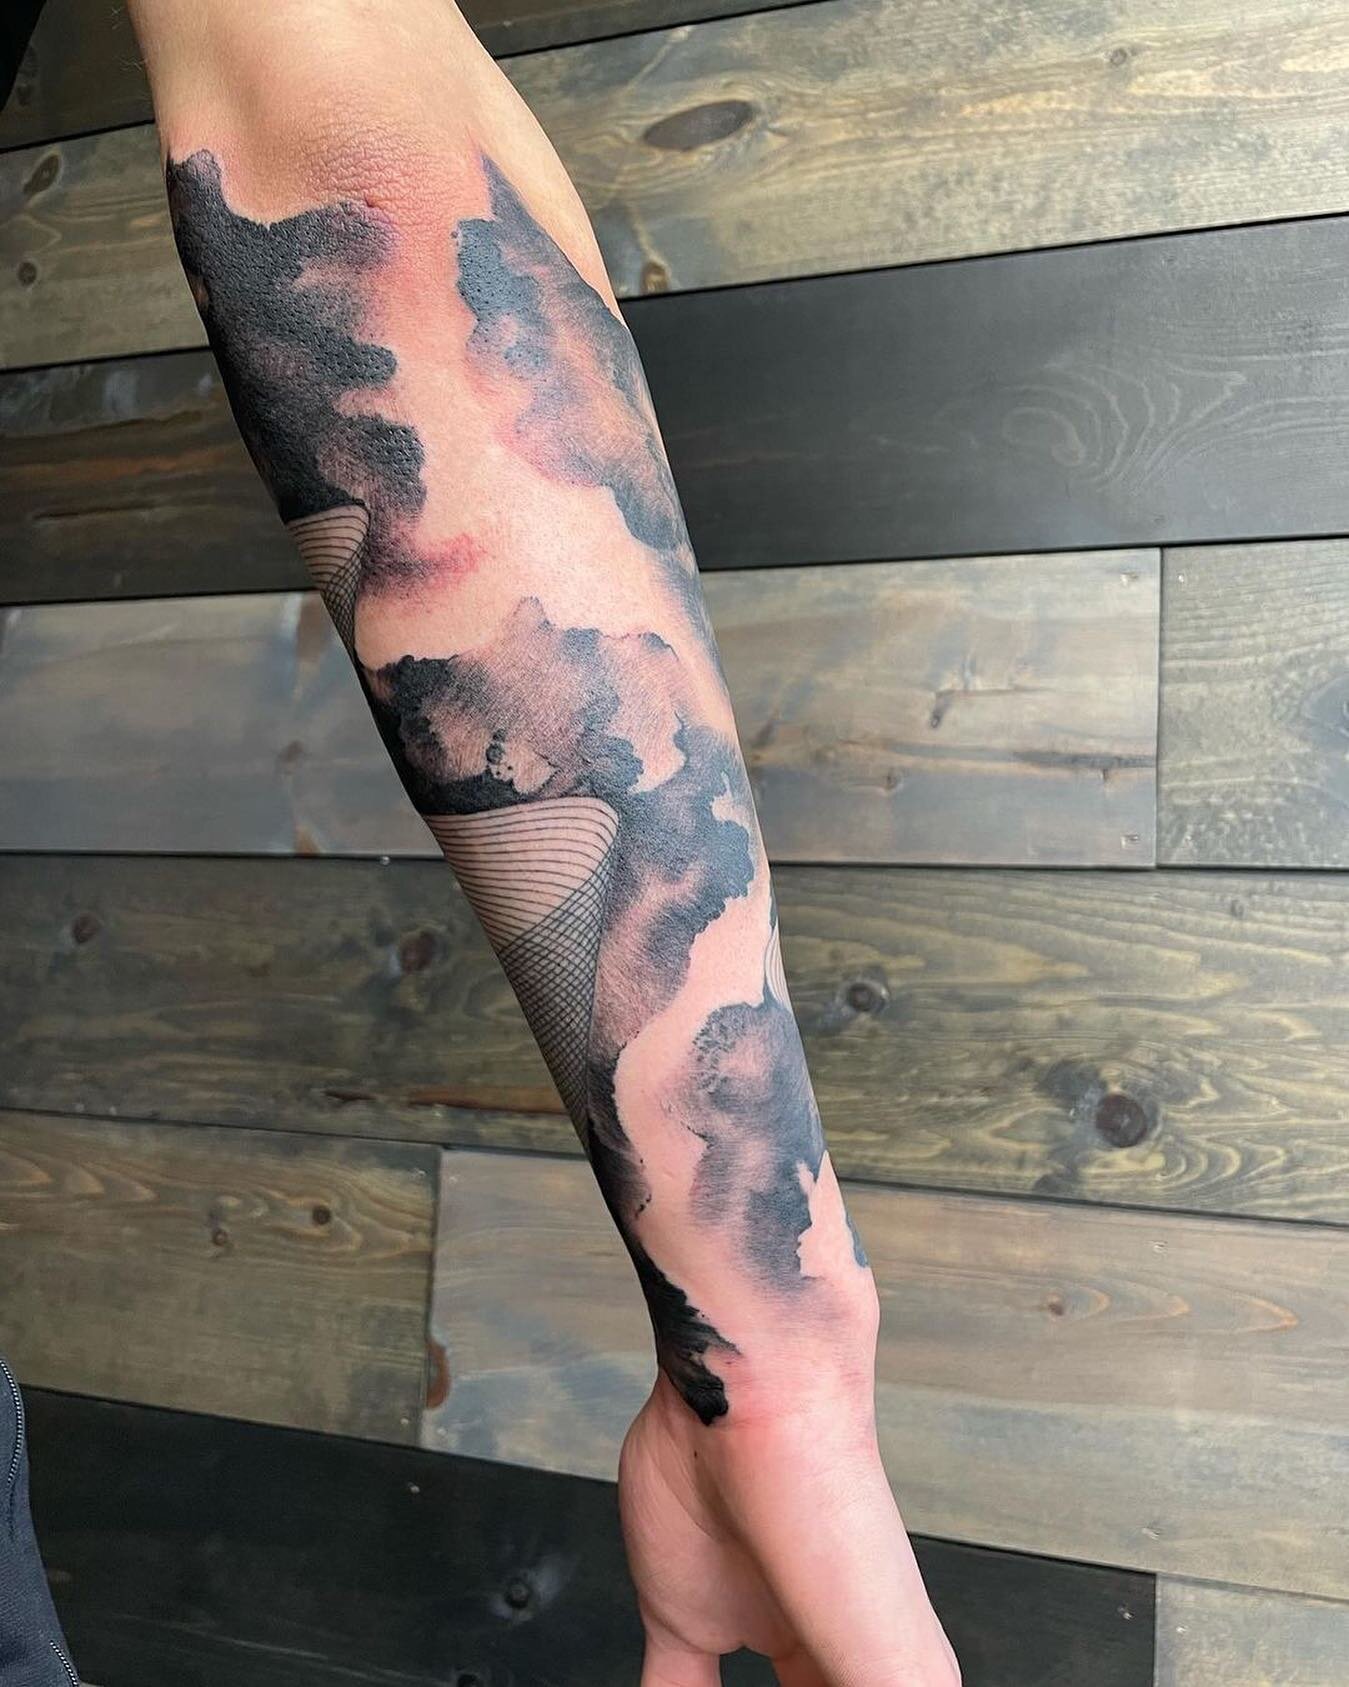 @tattoosbykat is kind of amazing! we're incredibly impressed at the complex variety of textures Kat is able to achieve with a tattoo machine, including these dreamy soft watercolor effects.⁠
-⁠⠀⁠
-⁠⠀⁠
#tattoo #obsidiantattoosupply #killerink #femaleo